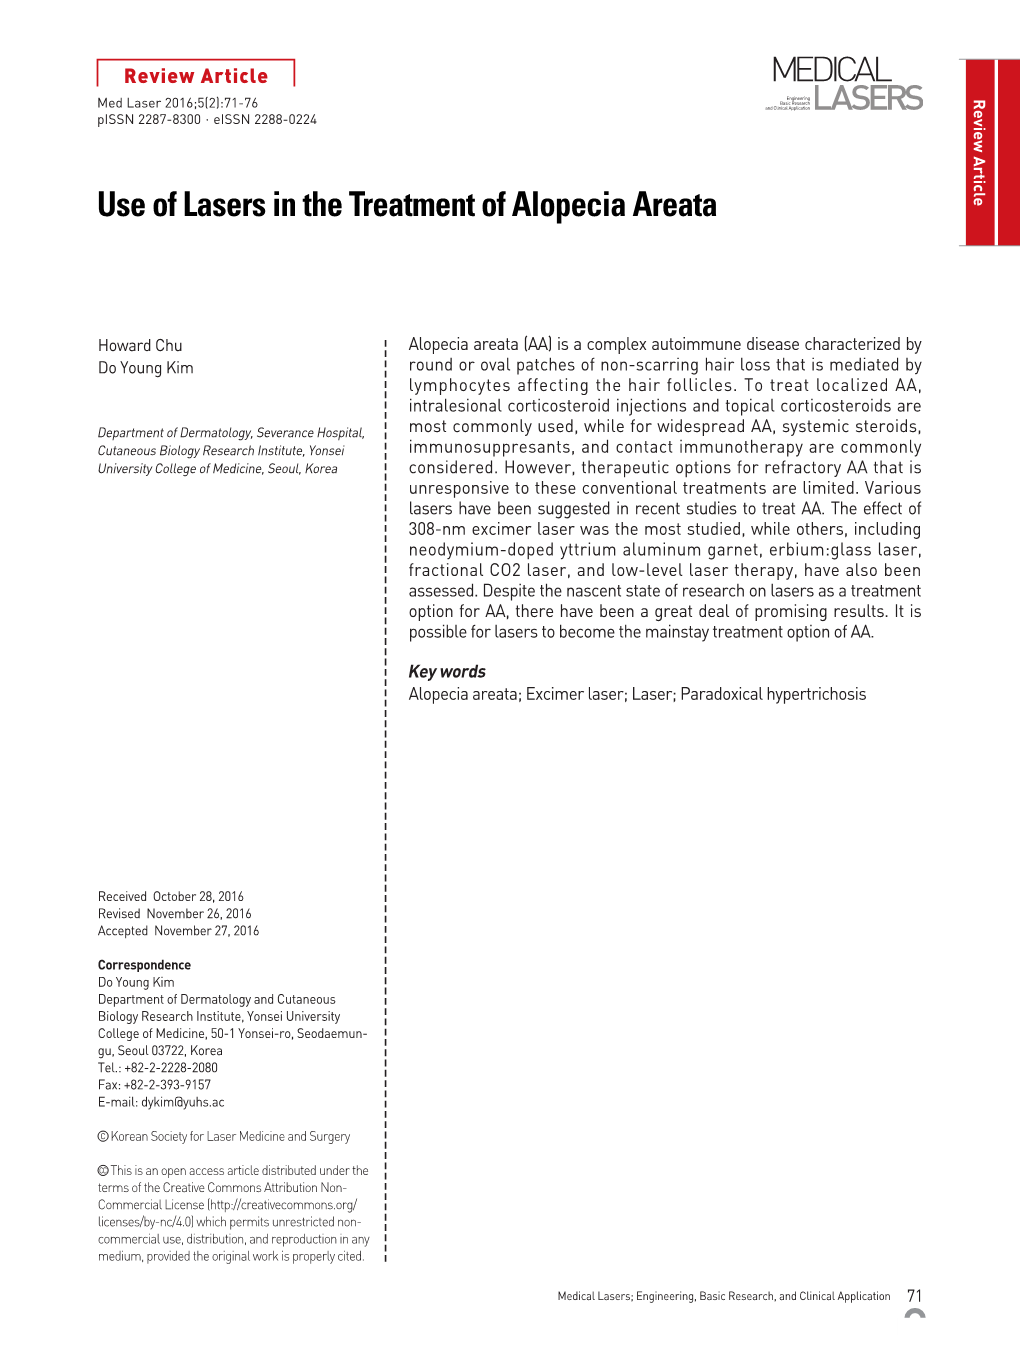 Use of Lasers in the Treatment of Alopecia Areata